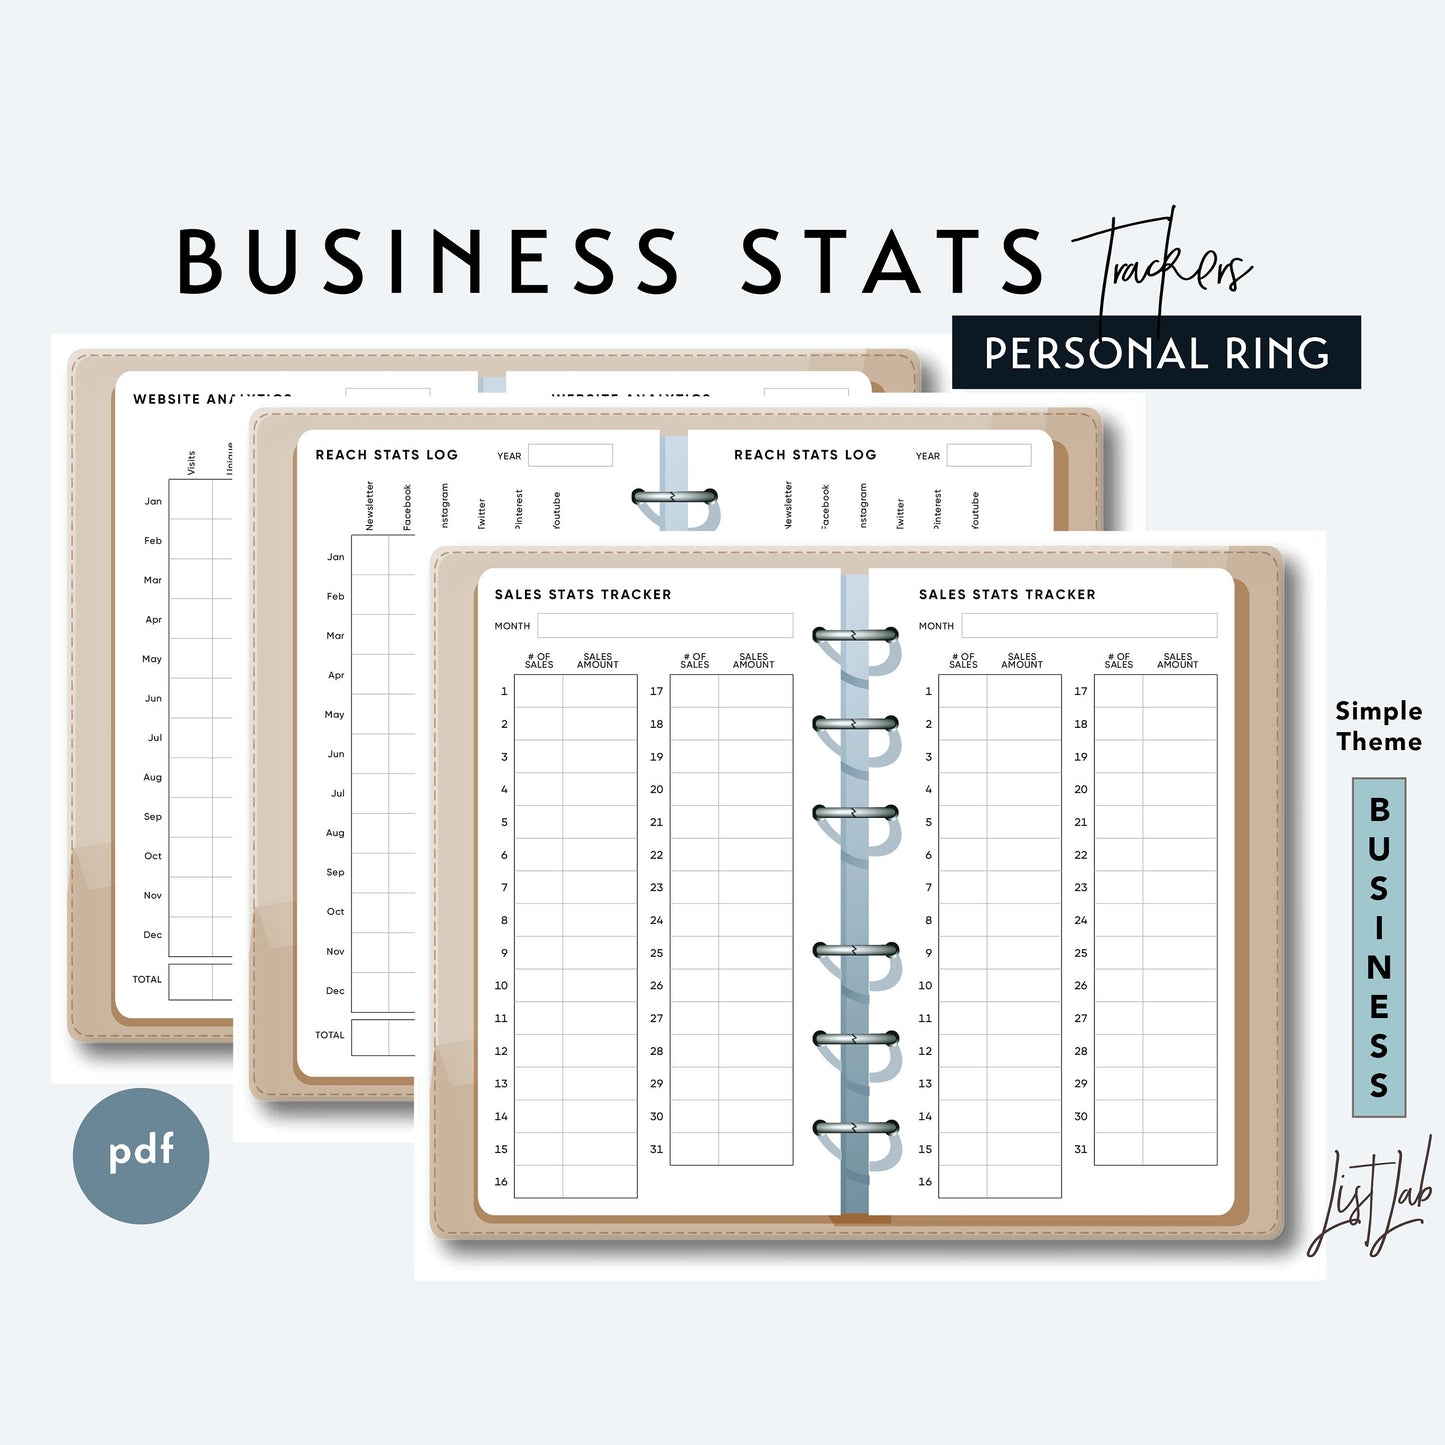 Personal Ring BUSINESS STATS TRACKER Printable Insert Set